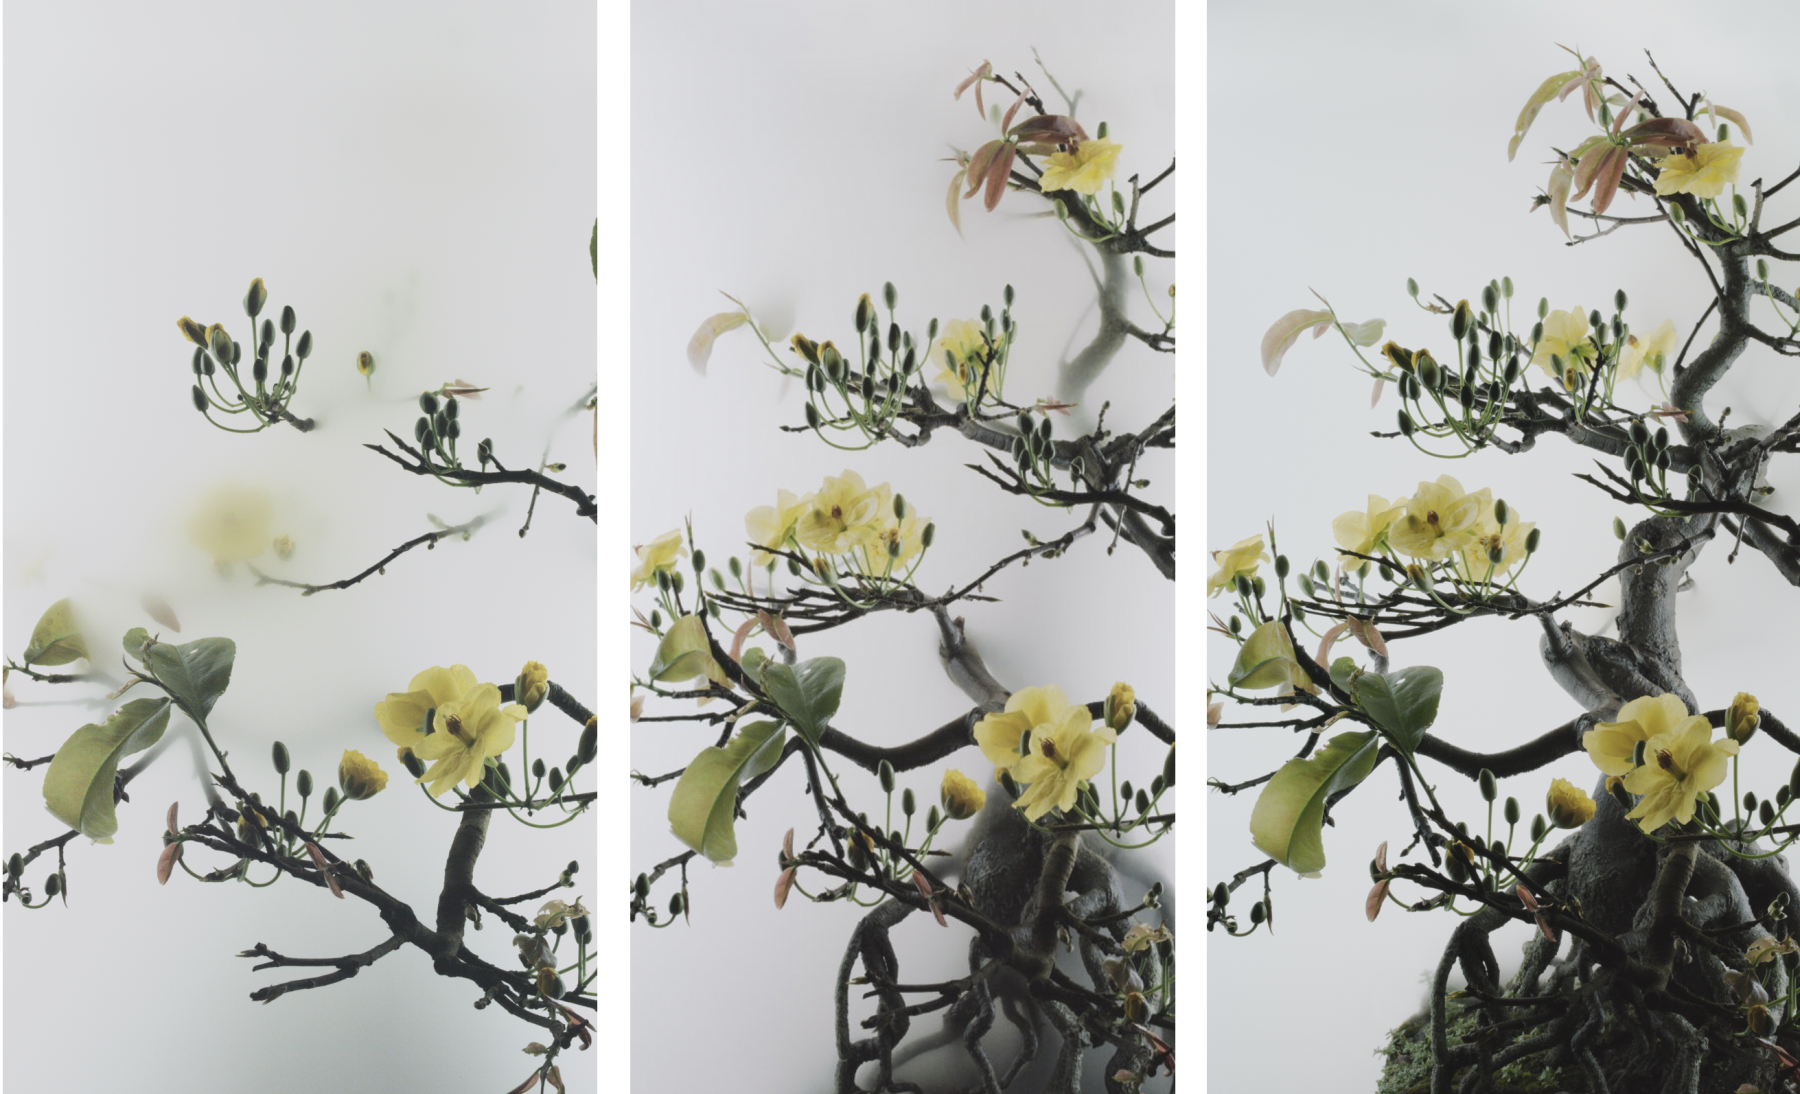 &nbsp;

Wu Chi-Tsung
Still Life 014 - Yello Mai flower, 2020
single-channel video, 6 min 55 sec
edition of 5 with 2 APs&nbsp;
(WCT-21)

*Stills from film pictured above